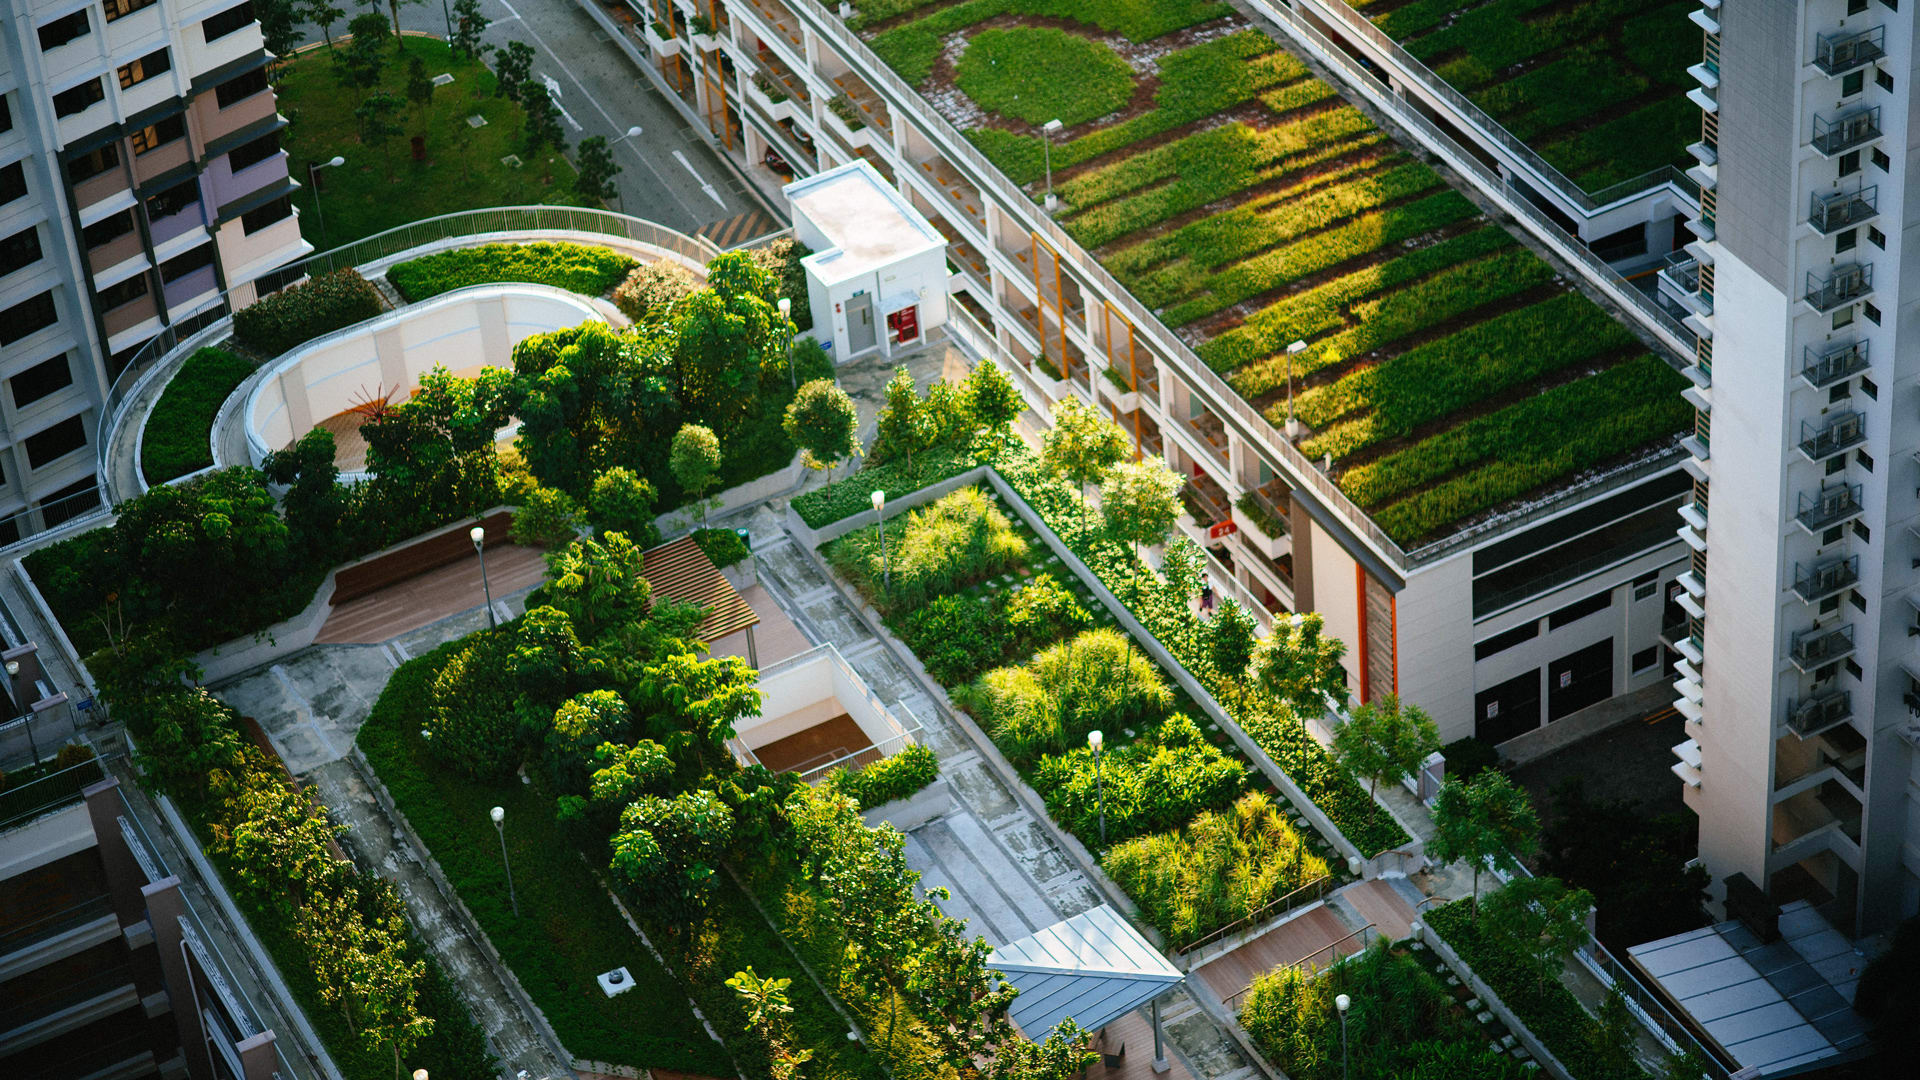 Green roofs can make cities healthier and happier. Why aren’t they everywhere?